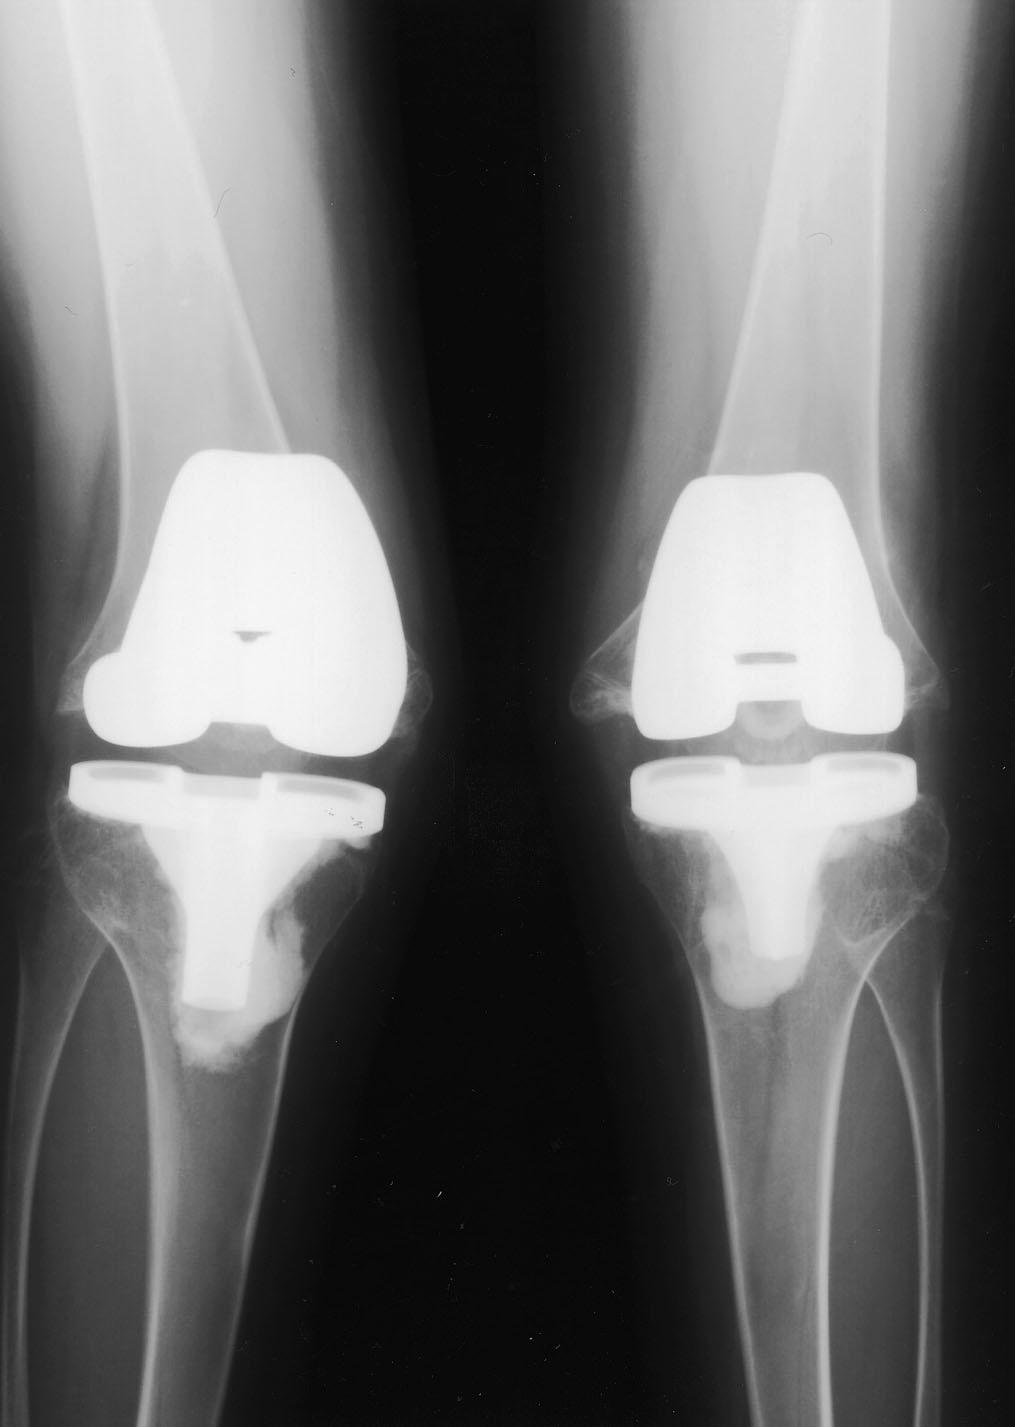 1092 for function, each with a maximum of 100 points. Knee scores were assessed before surgery, at two years, and at the time of the latest follow-up.